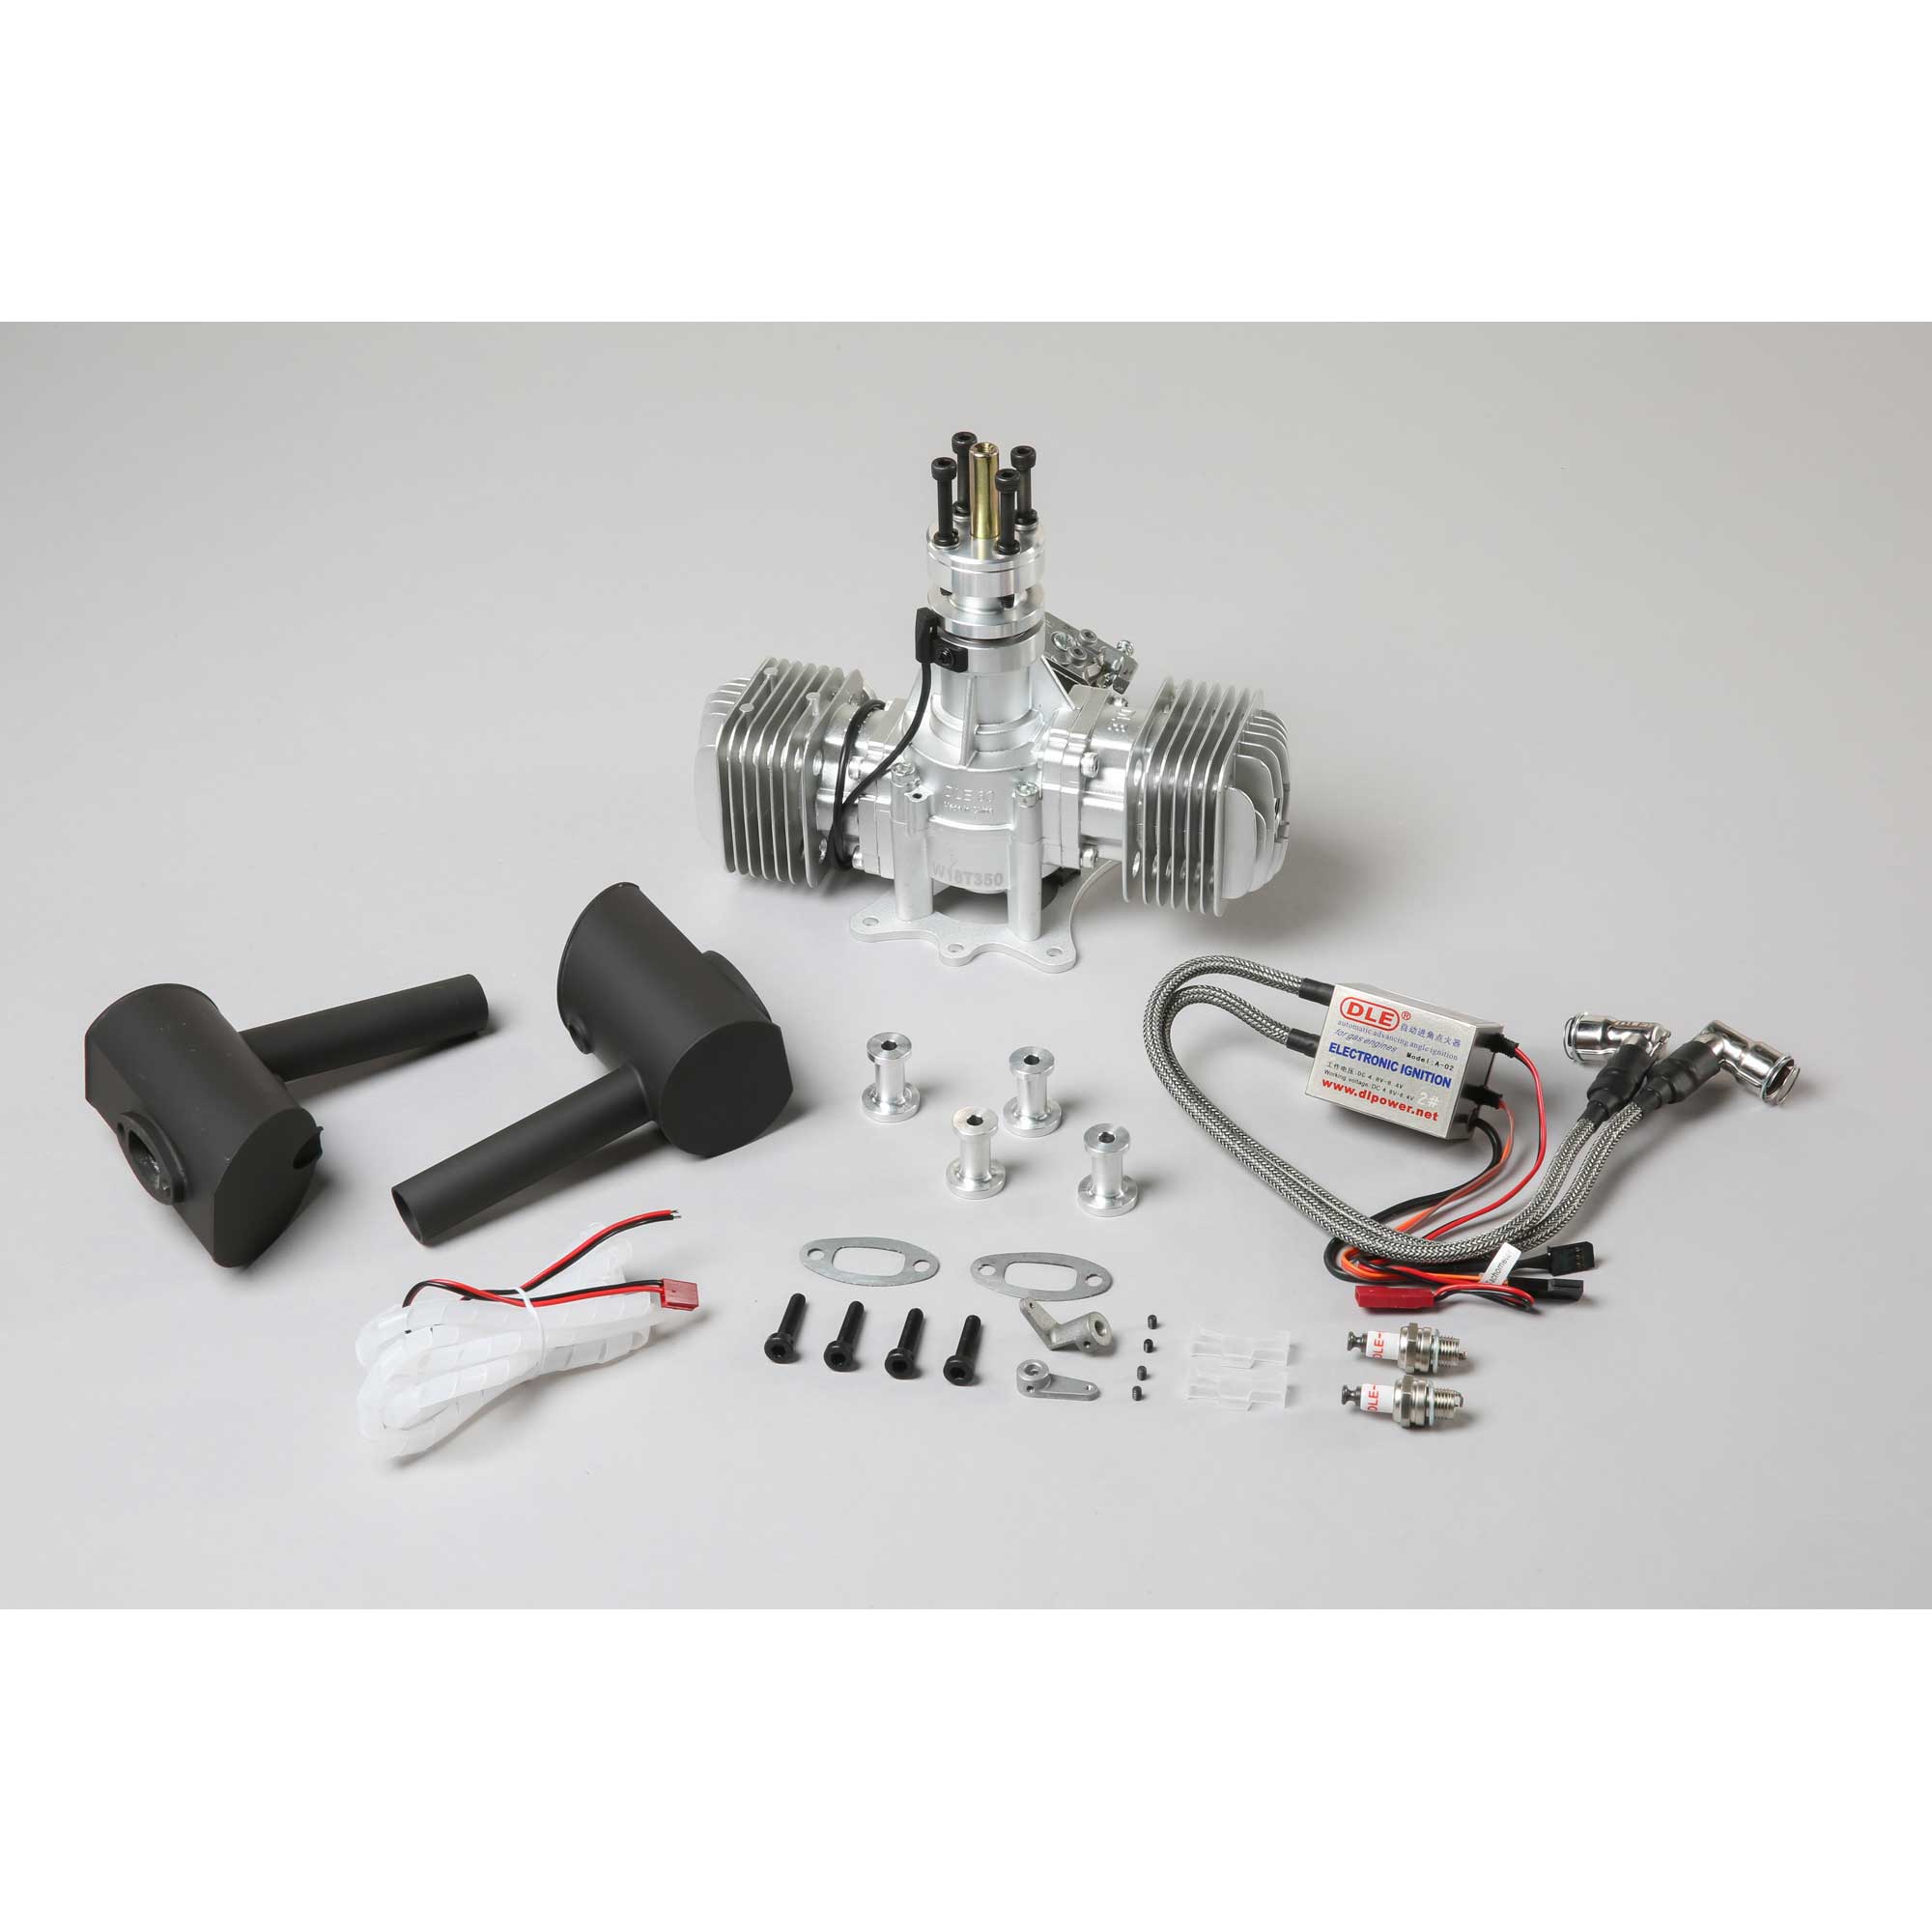 Strong RC Engine Starter for Gasoline/Nitro Engine RC Helicopter Airplane  36mm